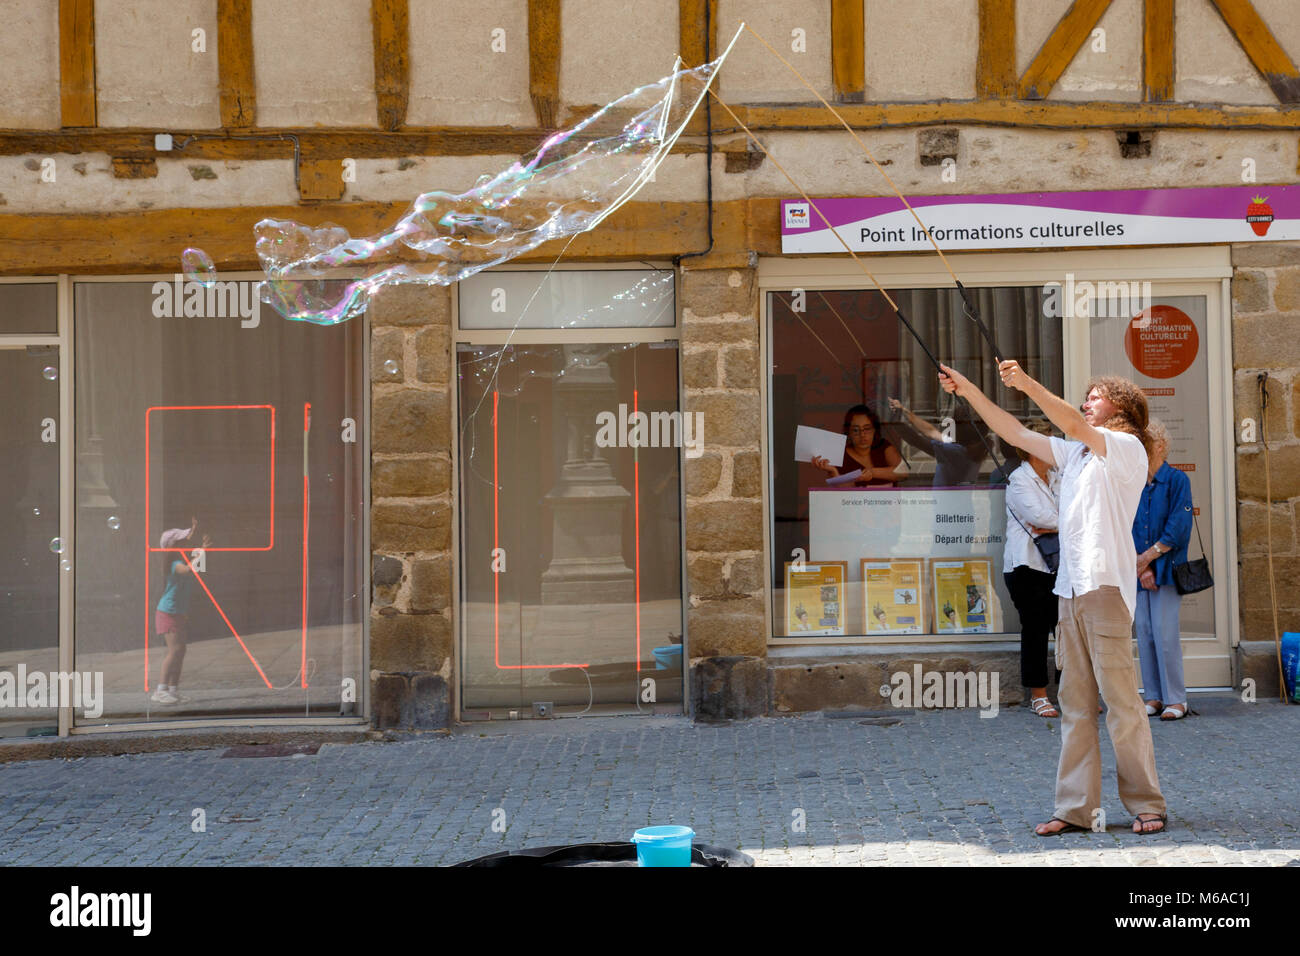 Street entertainer makes soap bubbles.  The reflection of a young girl can be seen in the window waiting to burst the bubbles as they float past her. Stock Photo